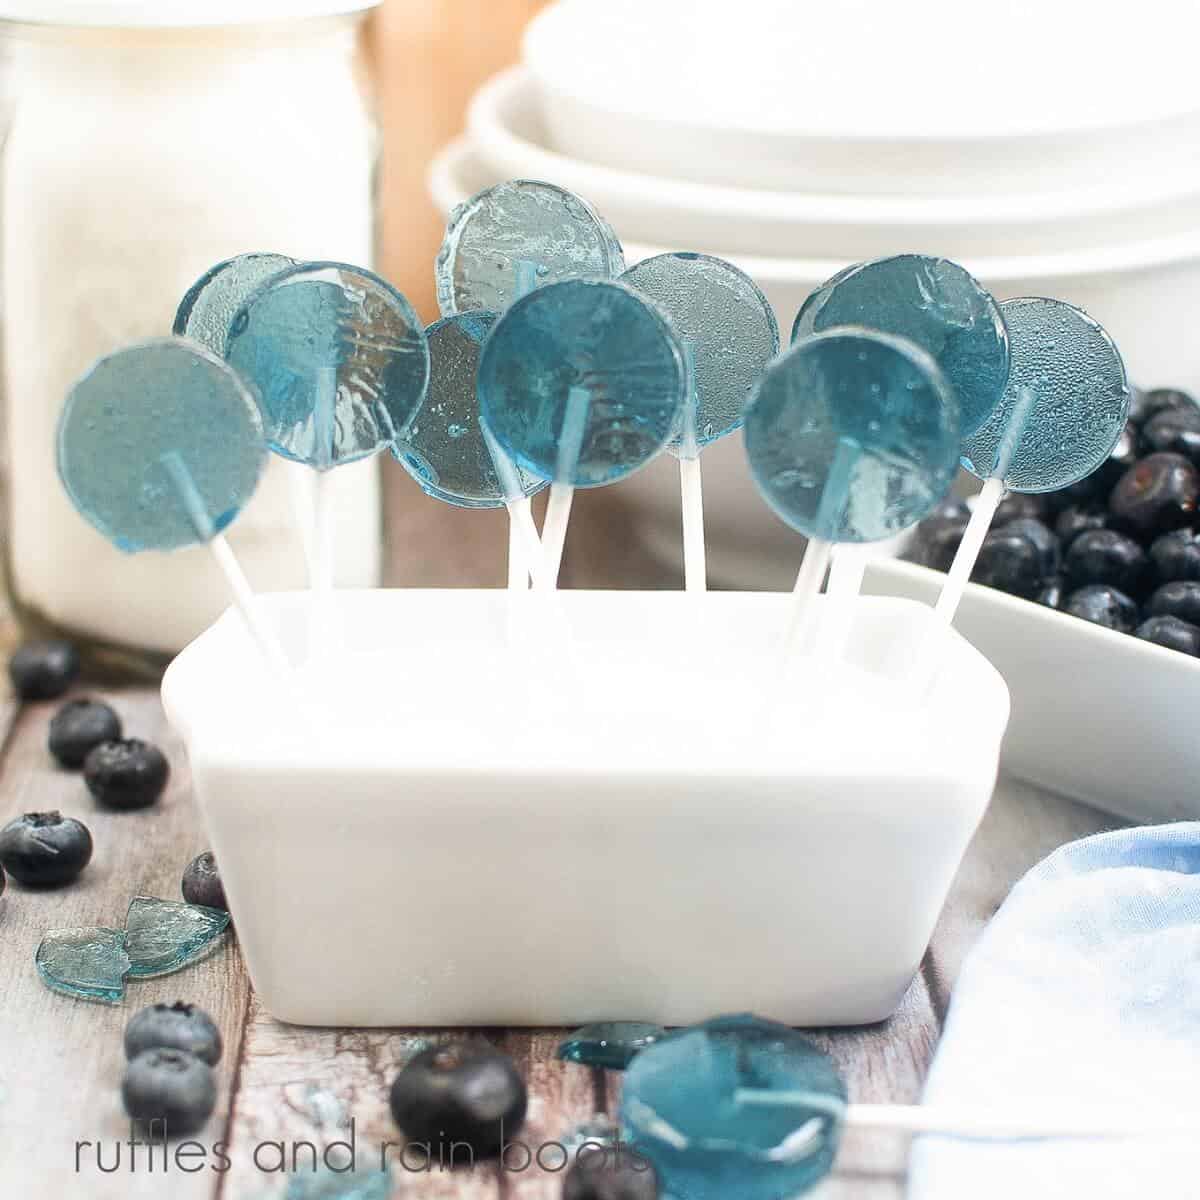 Several homemade blueberry lollipops are in a white container next to a white square dish of fresh blueberries on a weathered wood surface.